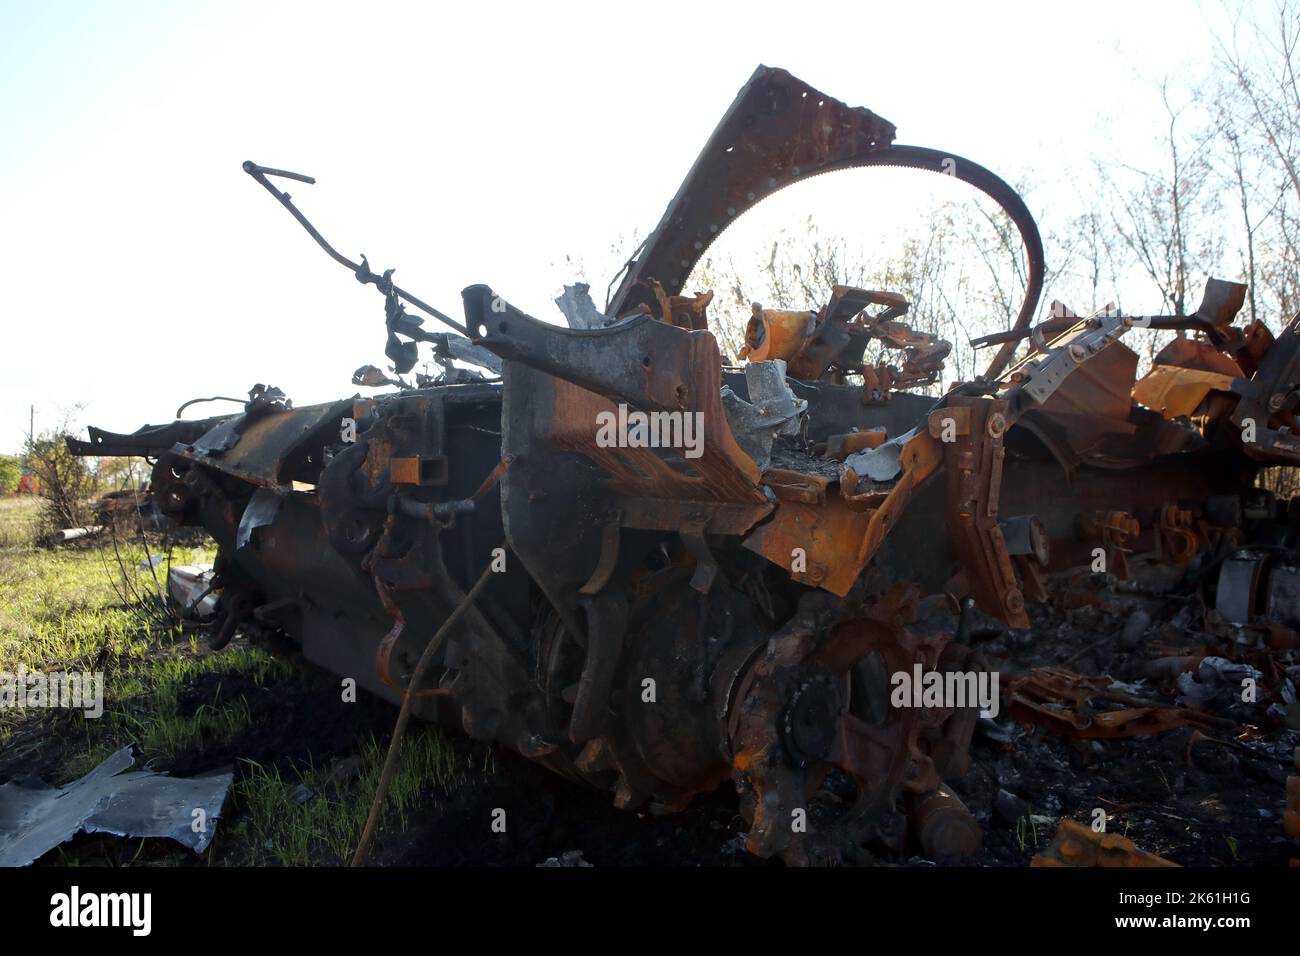 KHARKIV REGION, UKRAINE - OCTOBER 11, 2022 - Fragments of a destroyed russian tank are seen in the village of Pisky-Radkivski liberated from the russian occupiers , Kharkiv Region, northeastern Ukraine. Credit: Ukrinform/Alamy Live News Stock Photo